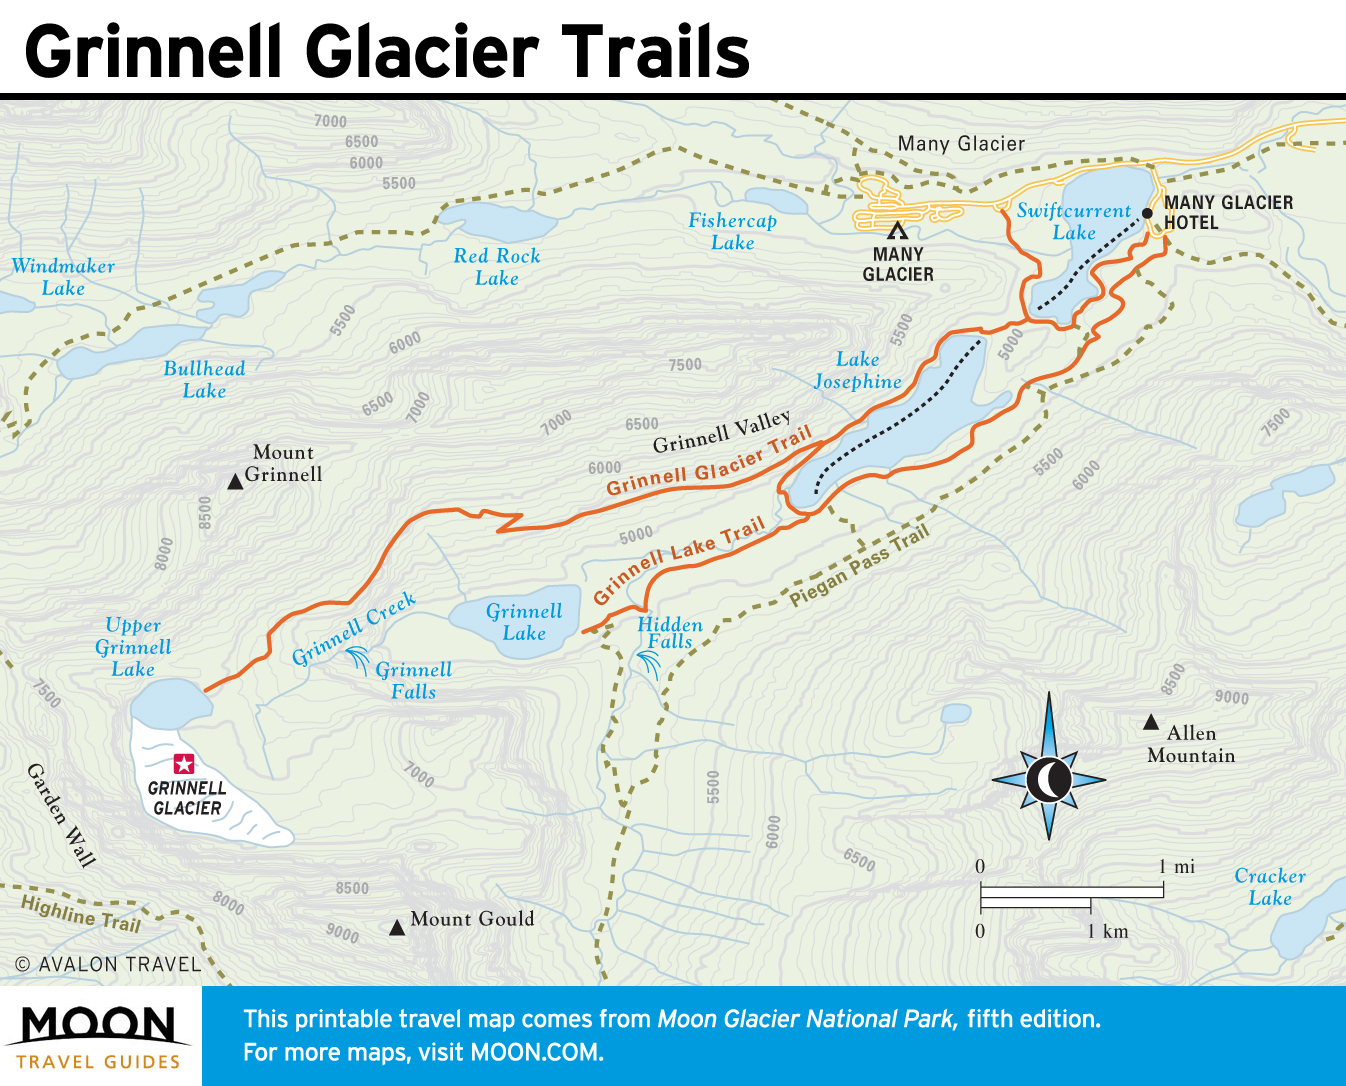 Grinnell Glacier svg #12, Download drawings